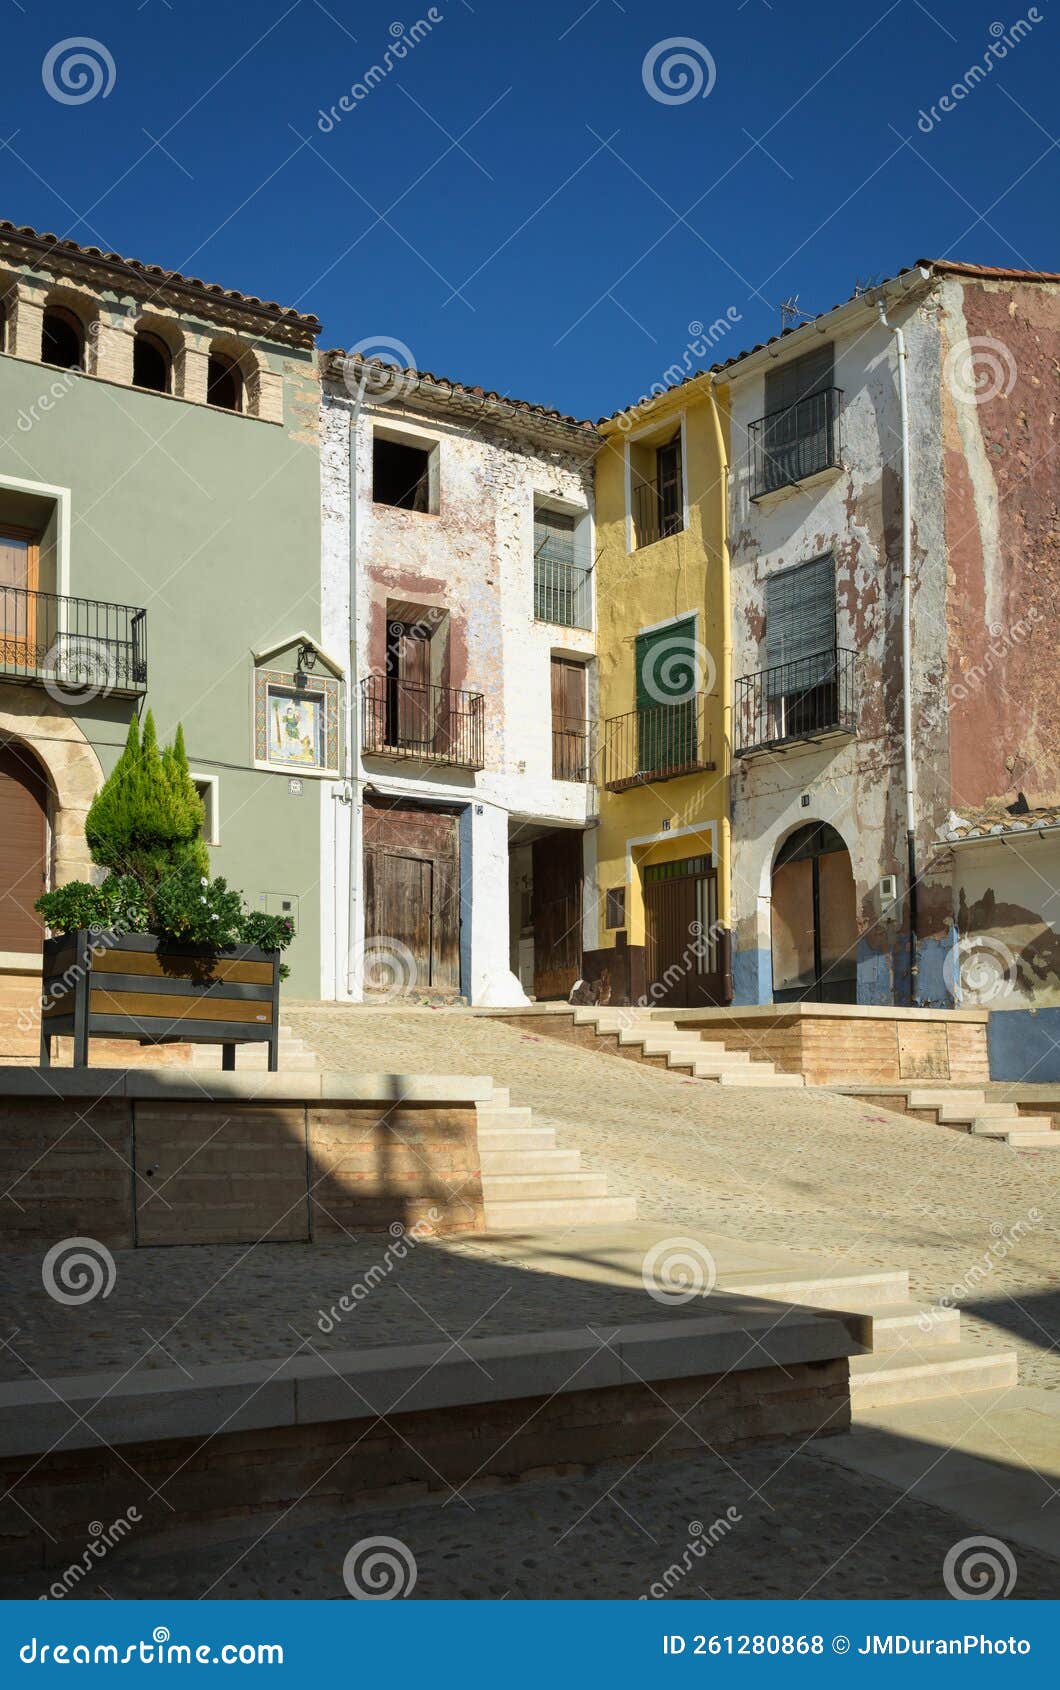 colorful old houses in the streets of onda, castellon, spain